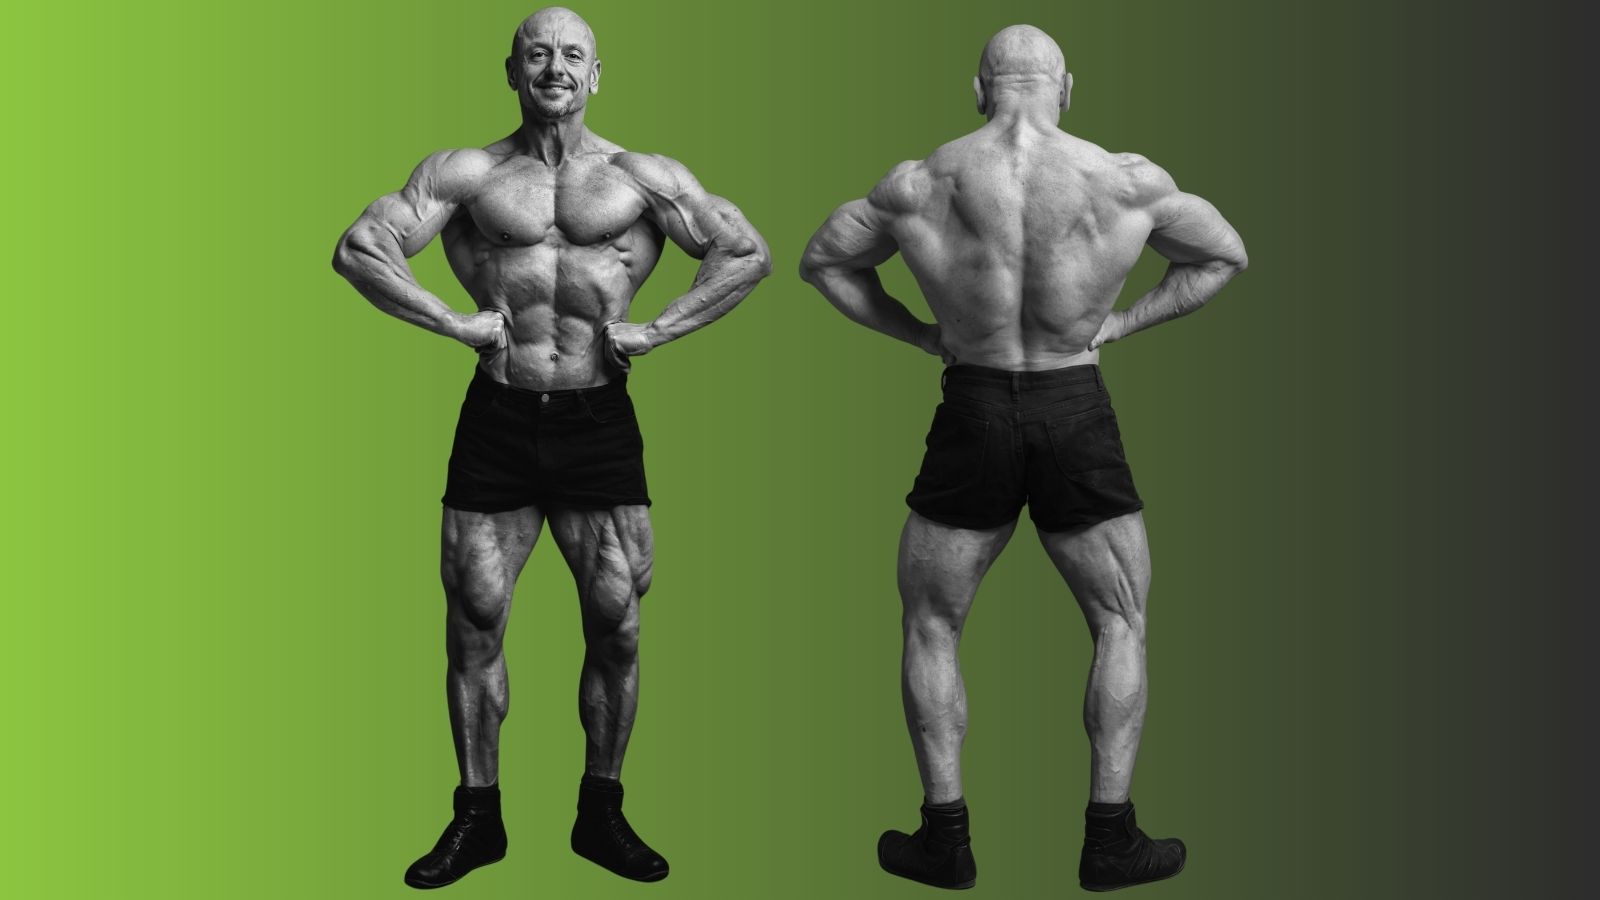 11 Bodybuilding Poses - Perfect Your Posing & Pose Like a Pro!